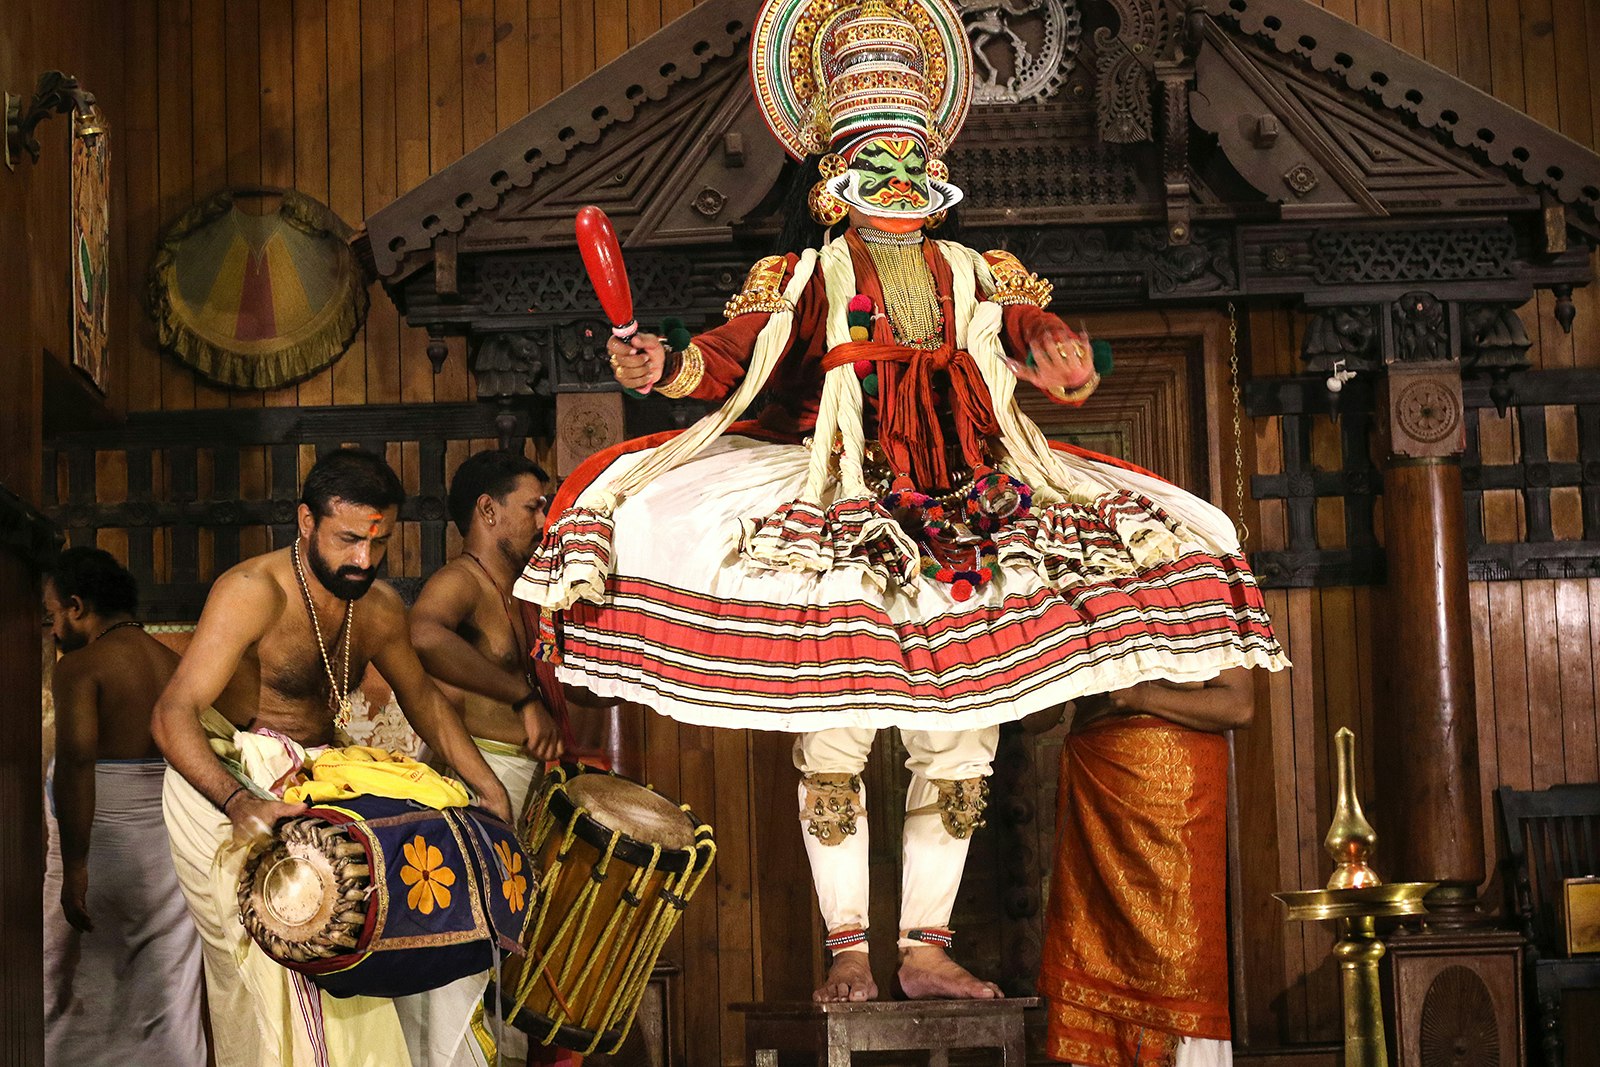 A Kathakali performer dancers on a small table while two men play drums behind him. His face is painted green and he wears a headdress, and a red and white skirt. Kochi, India.